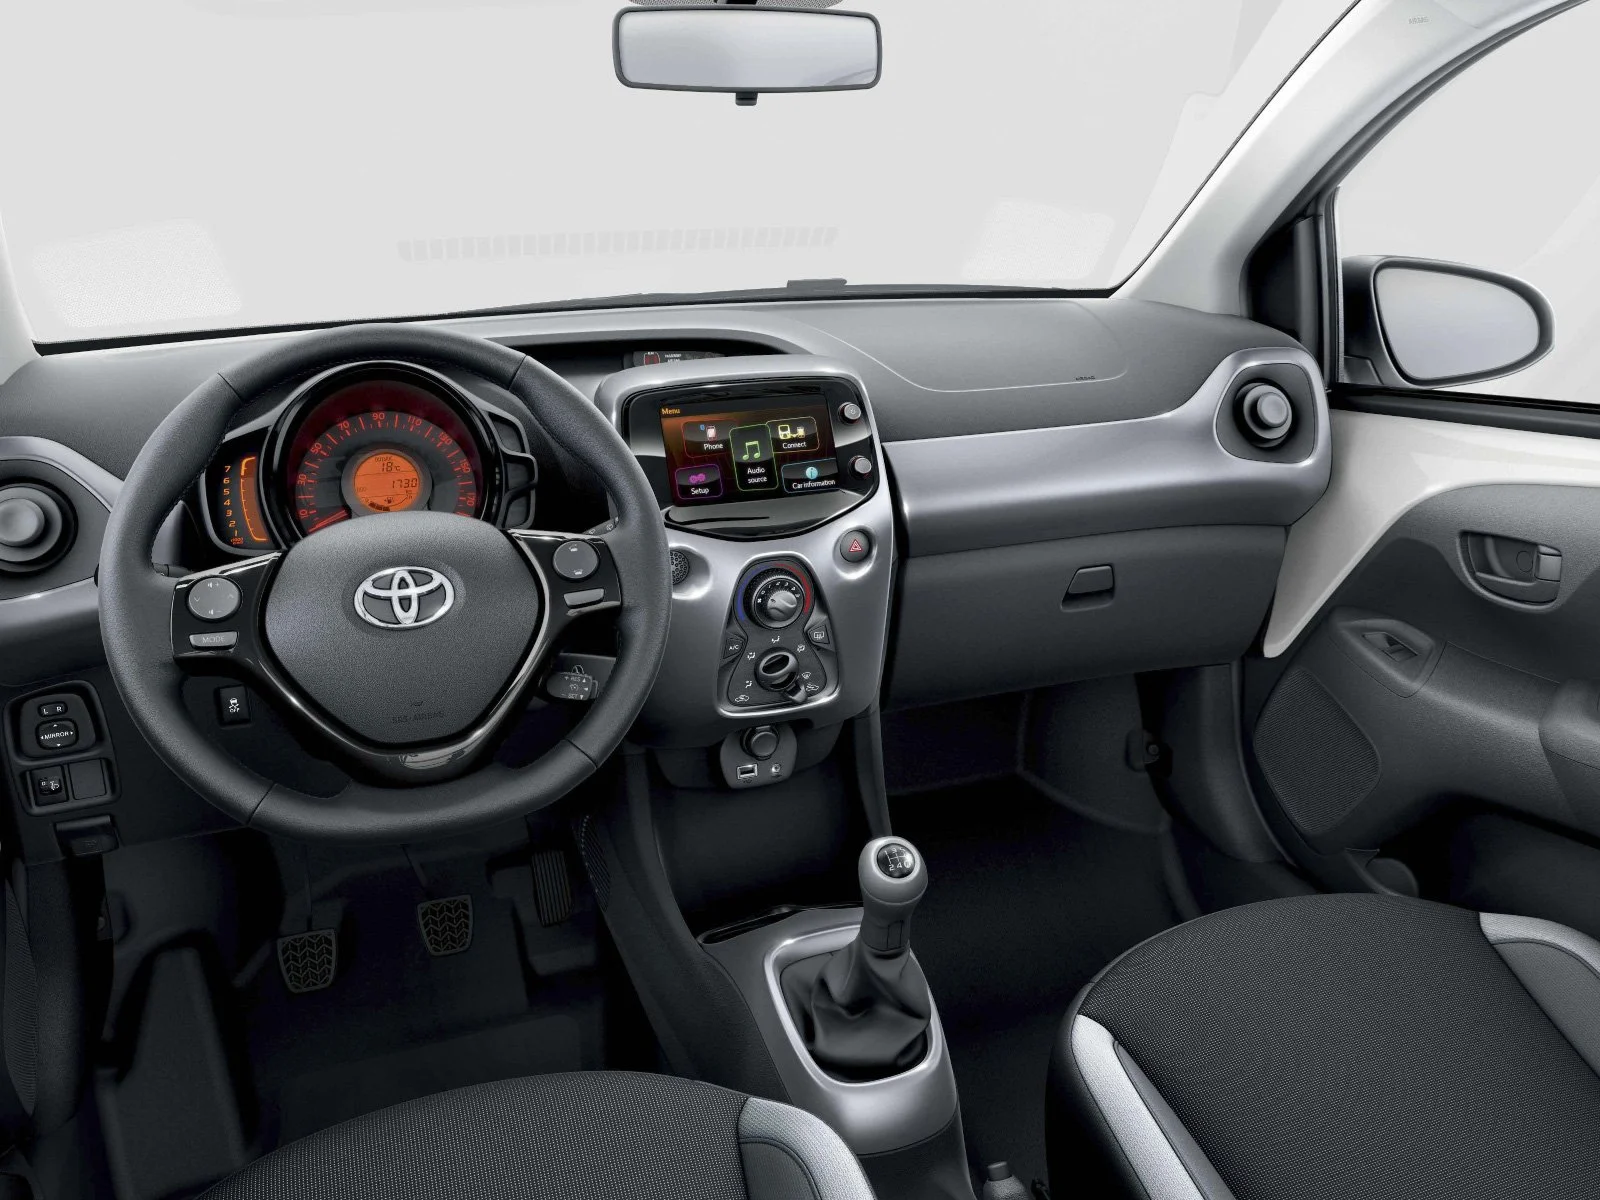 Toyota intends to patent a simulated manual transmission for electric cars